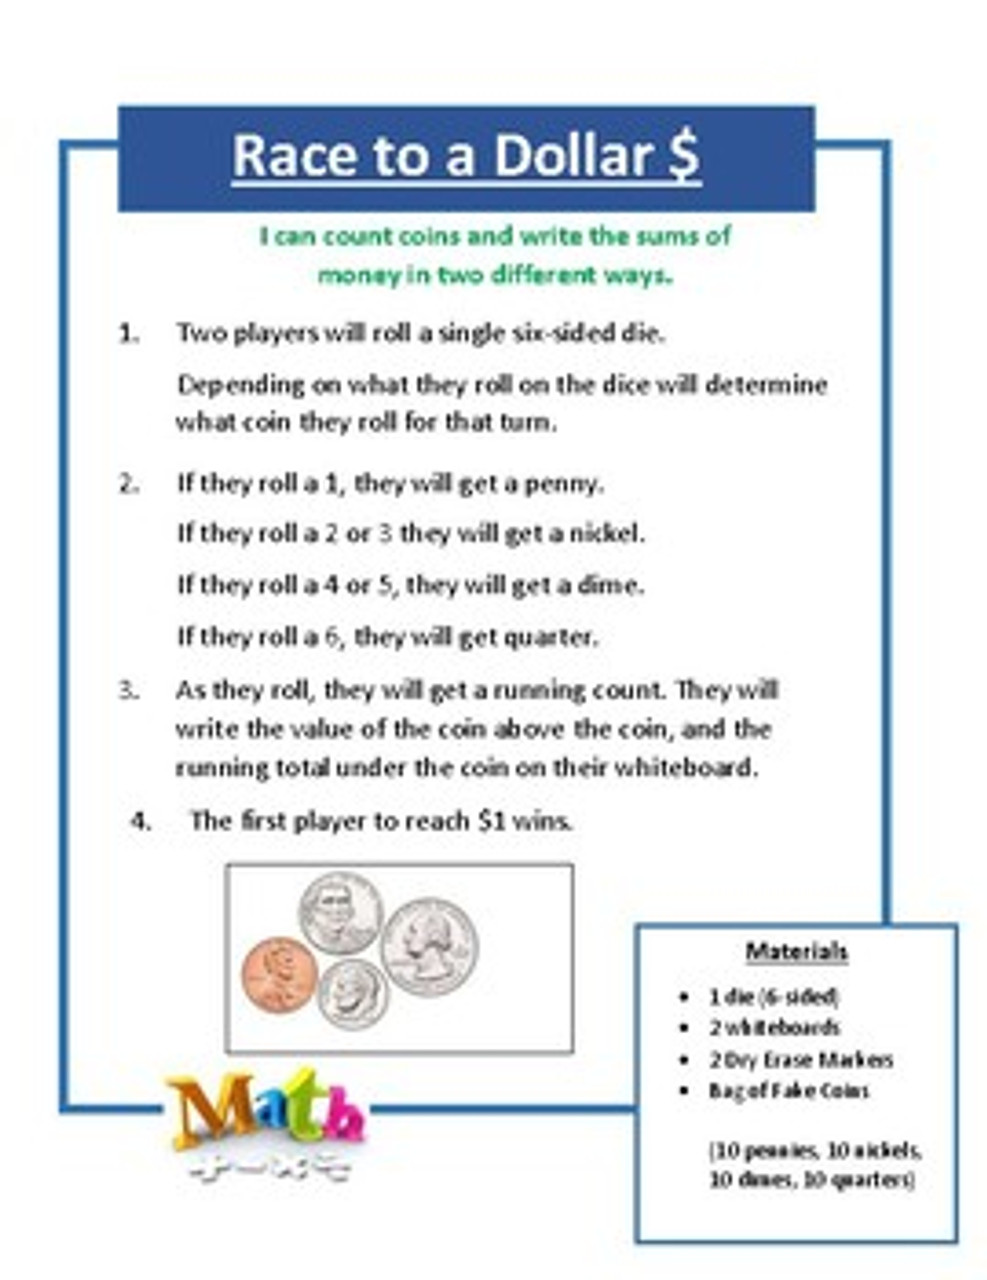 Roll and Race Dice Game, Roll and Cover, Do a Dot, Back to School, Math  Game